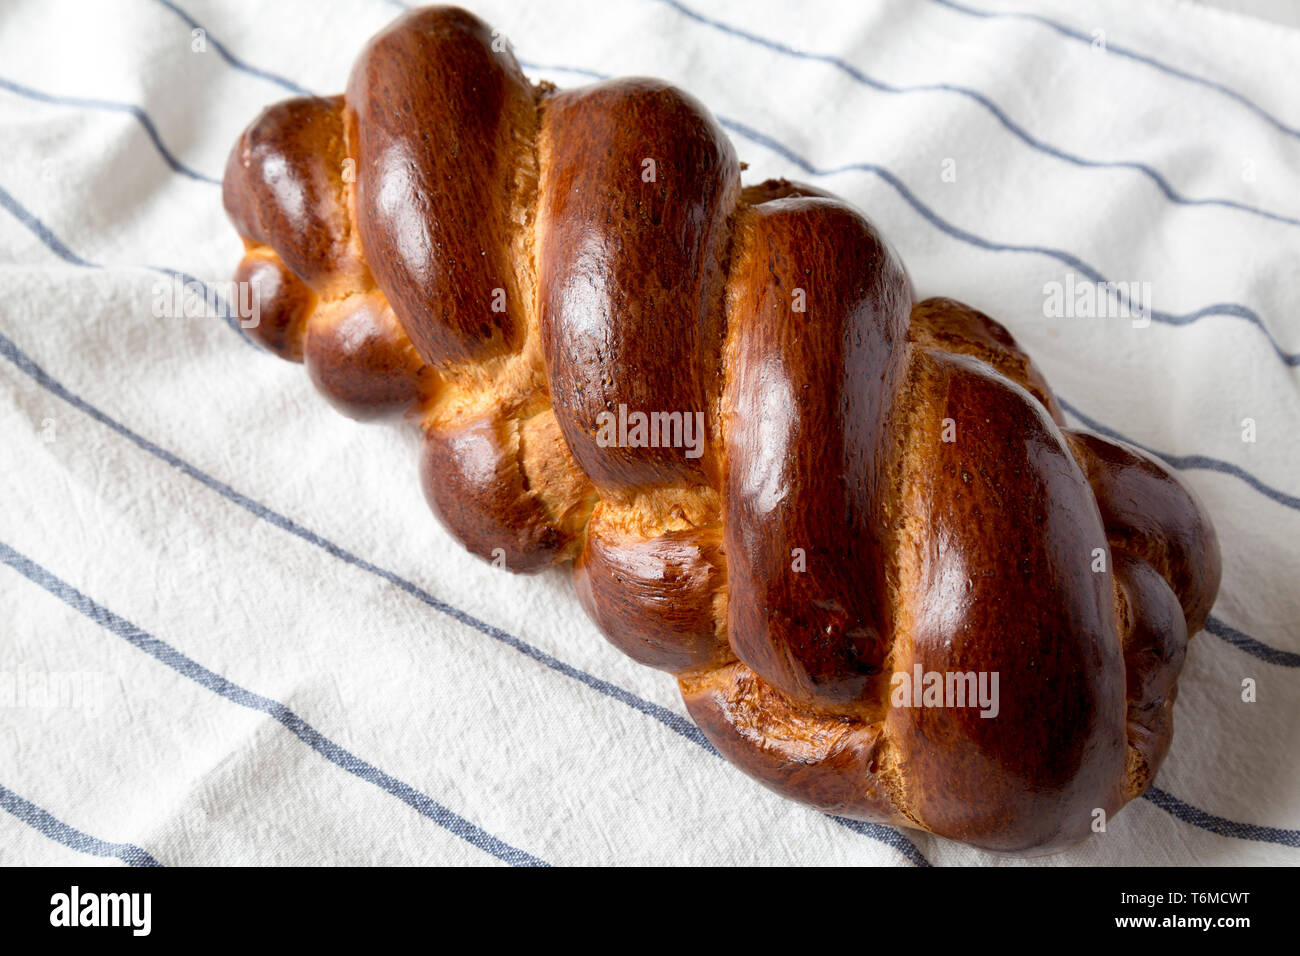 Homemade jewish challah bread on a white wooden background, side view. Stock Photo